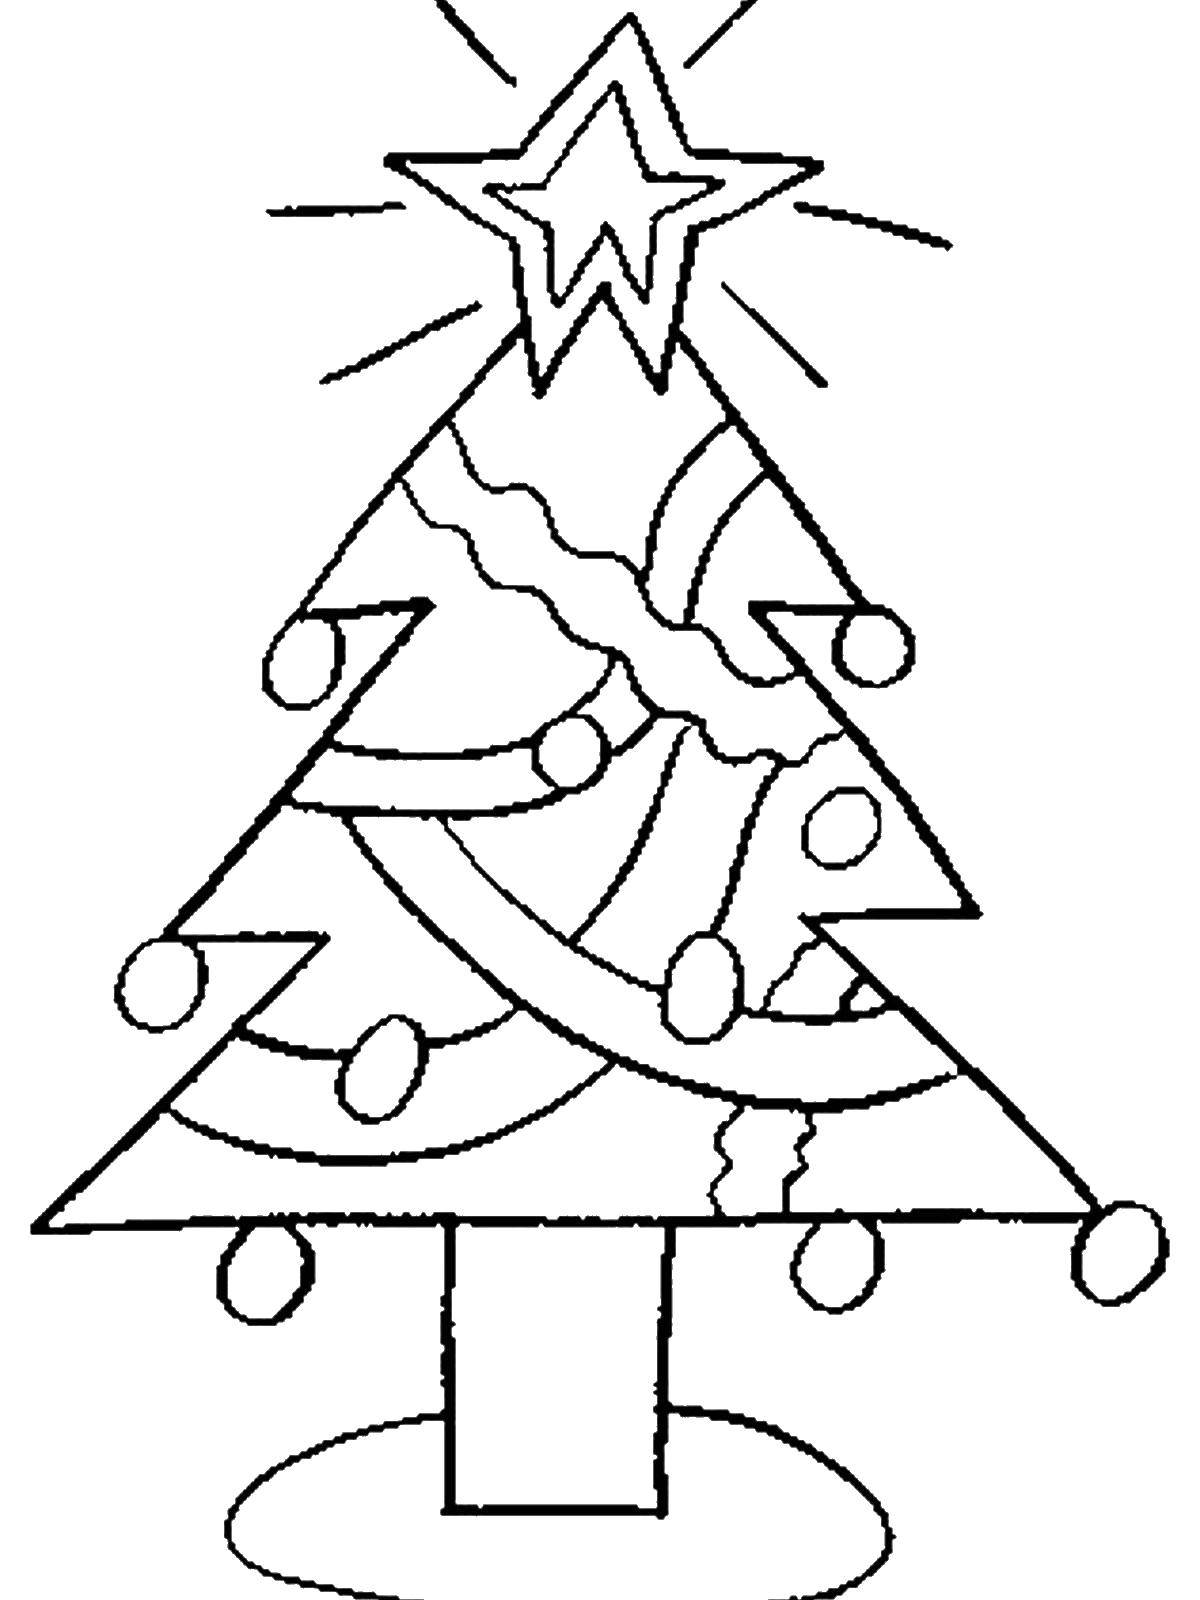 Coloring Christmas tree. Category coloring of the figures. Tags:  Tree.